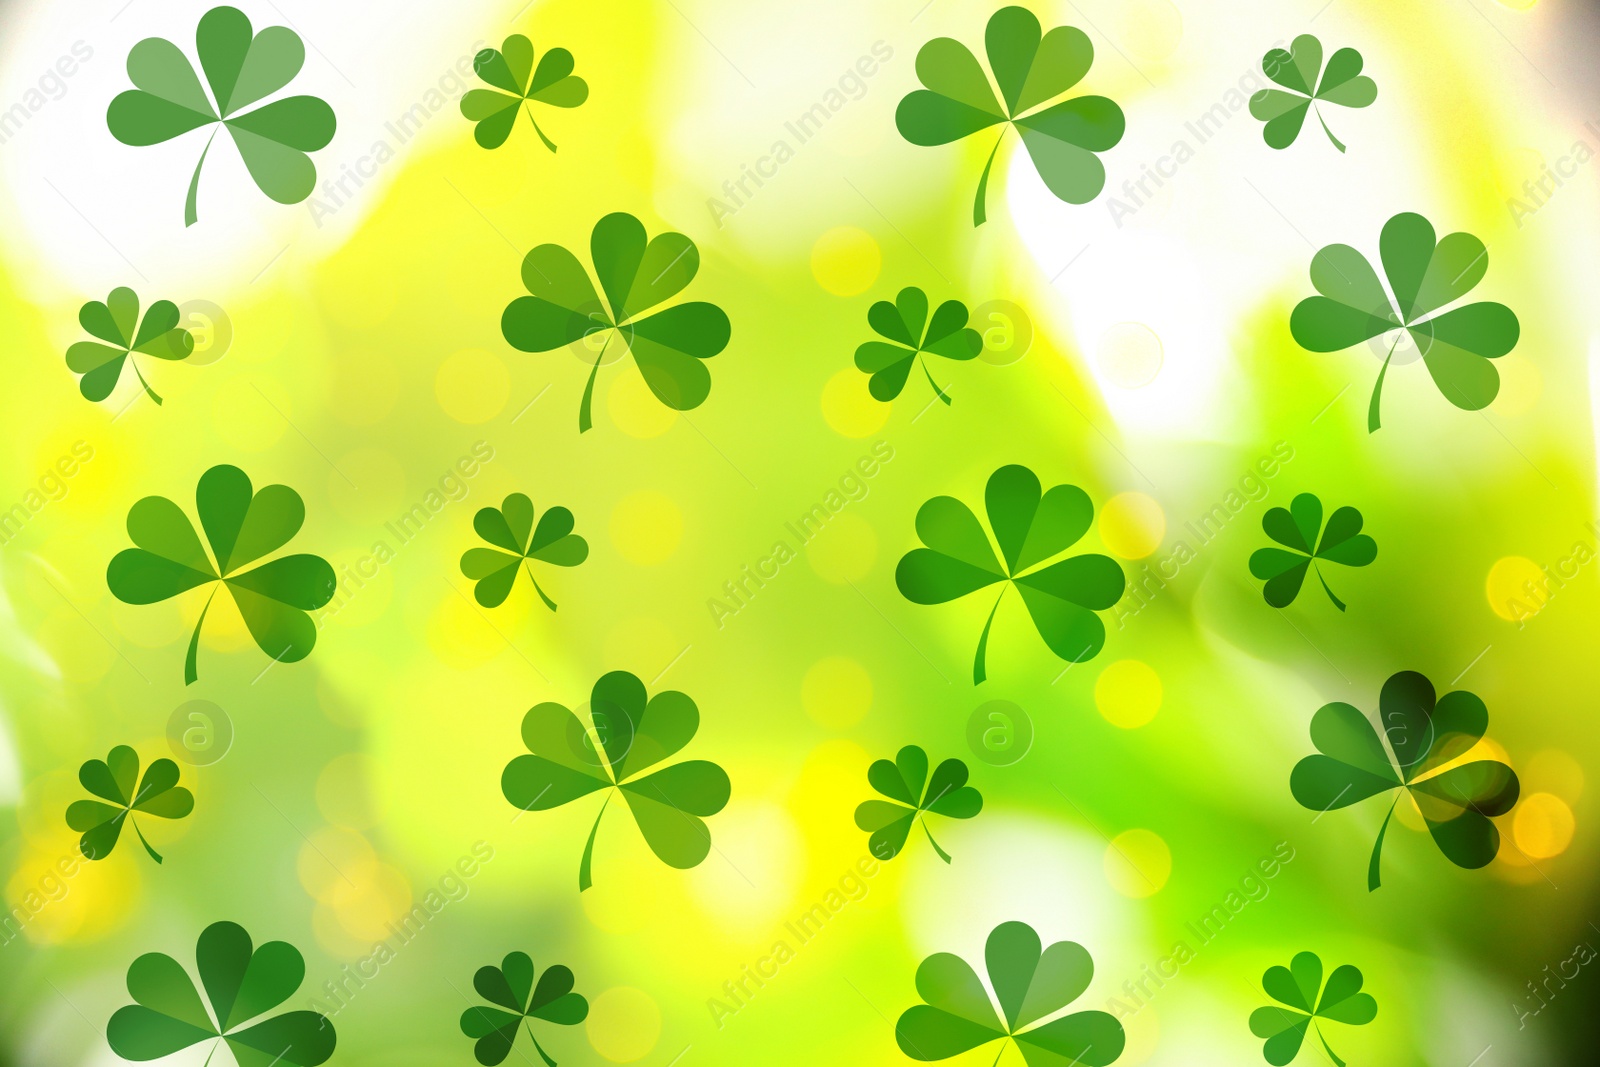 Image of Beautiful design with clover leaves, bokeh effect. St Patrick's day